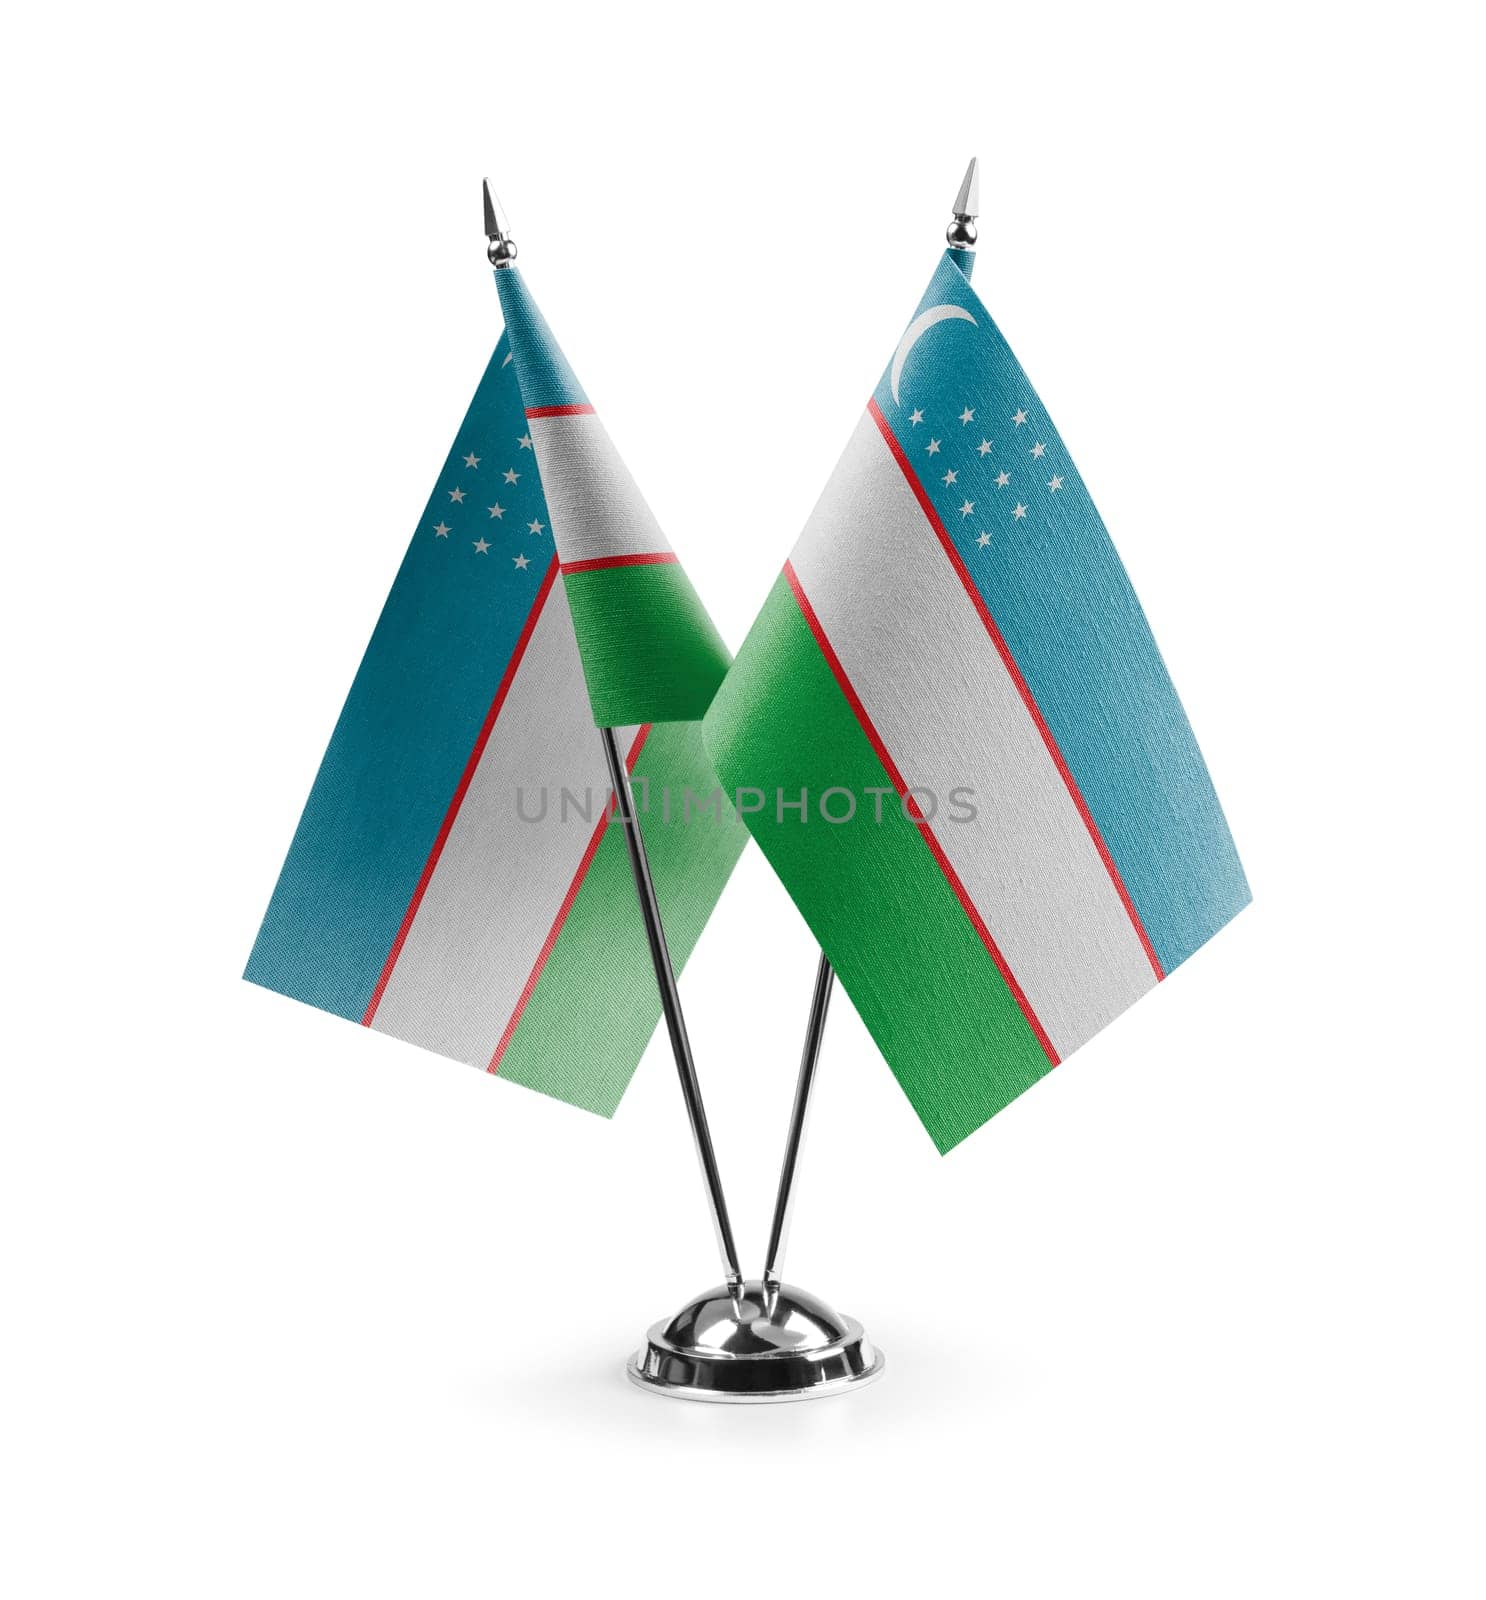 Small national flags of the Uzbekistan on a white background.